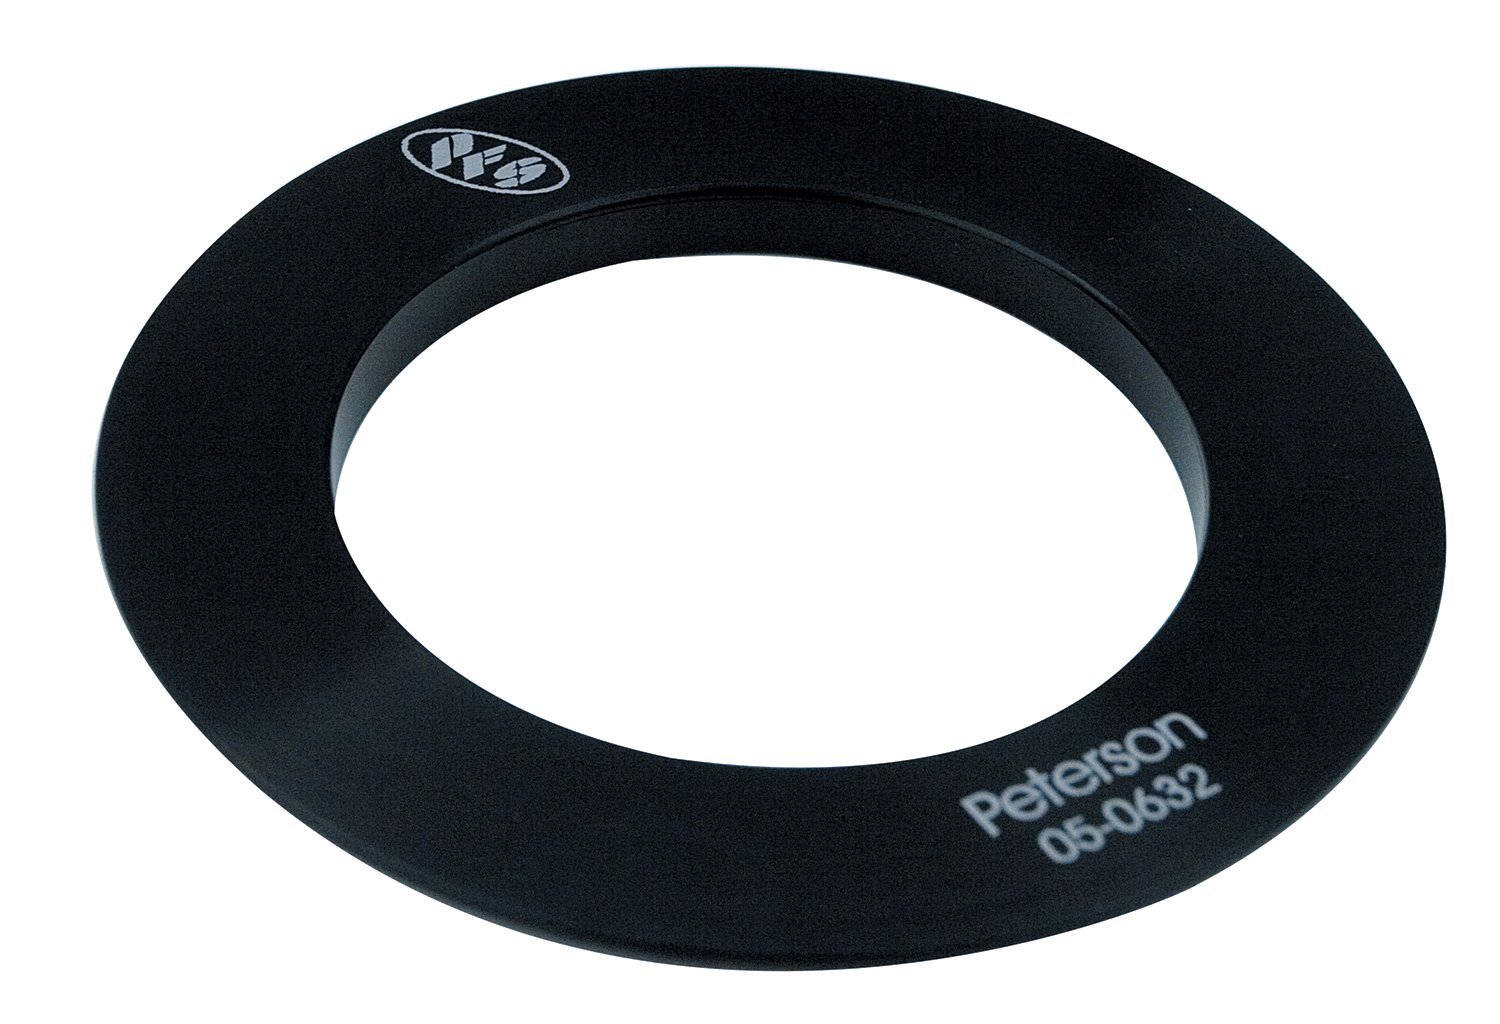 Pulley Flange Fits 615-05-1336 Designed for Use With Peterson Pulleys Only